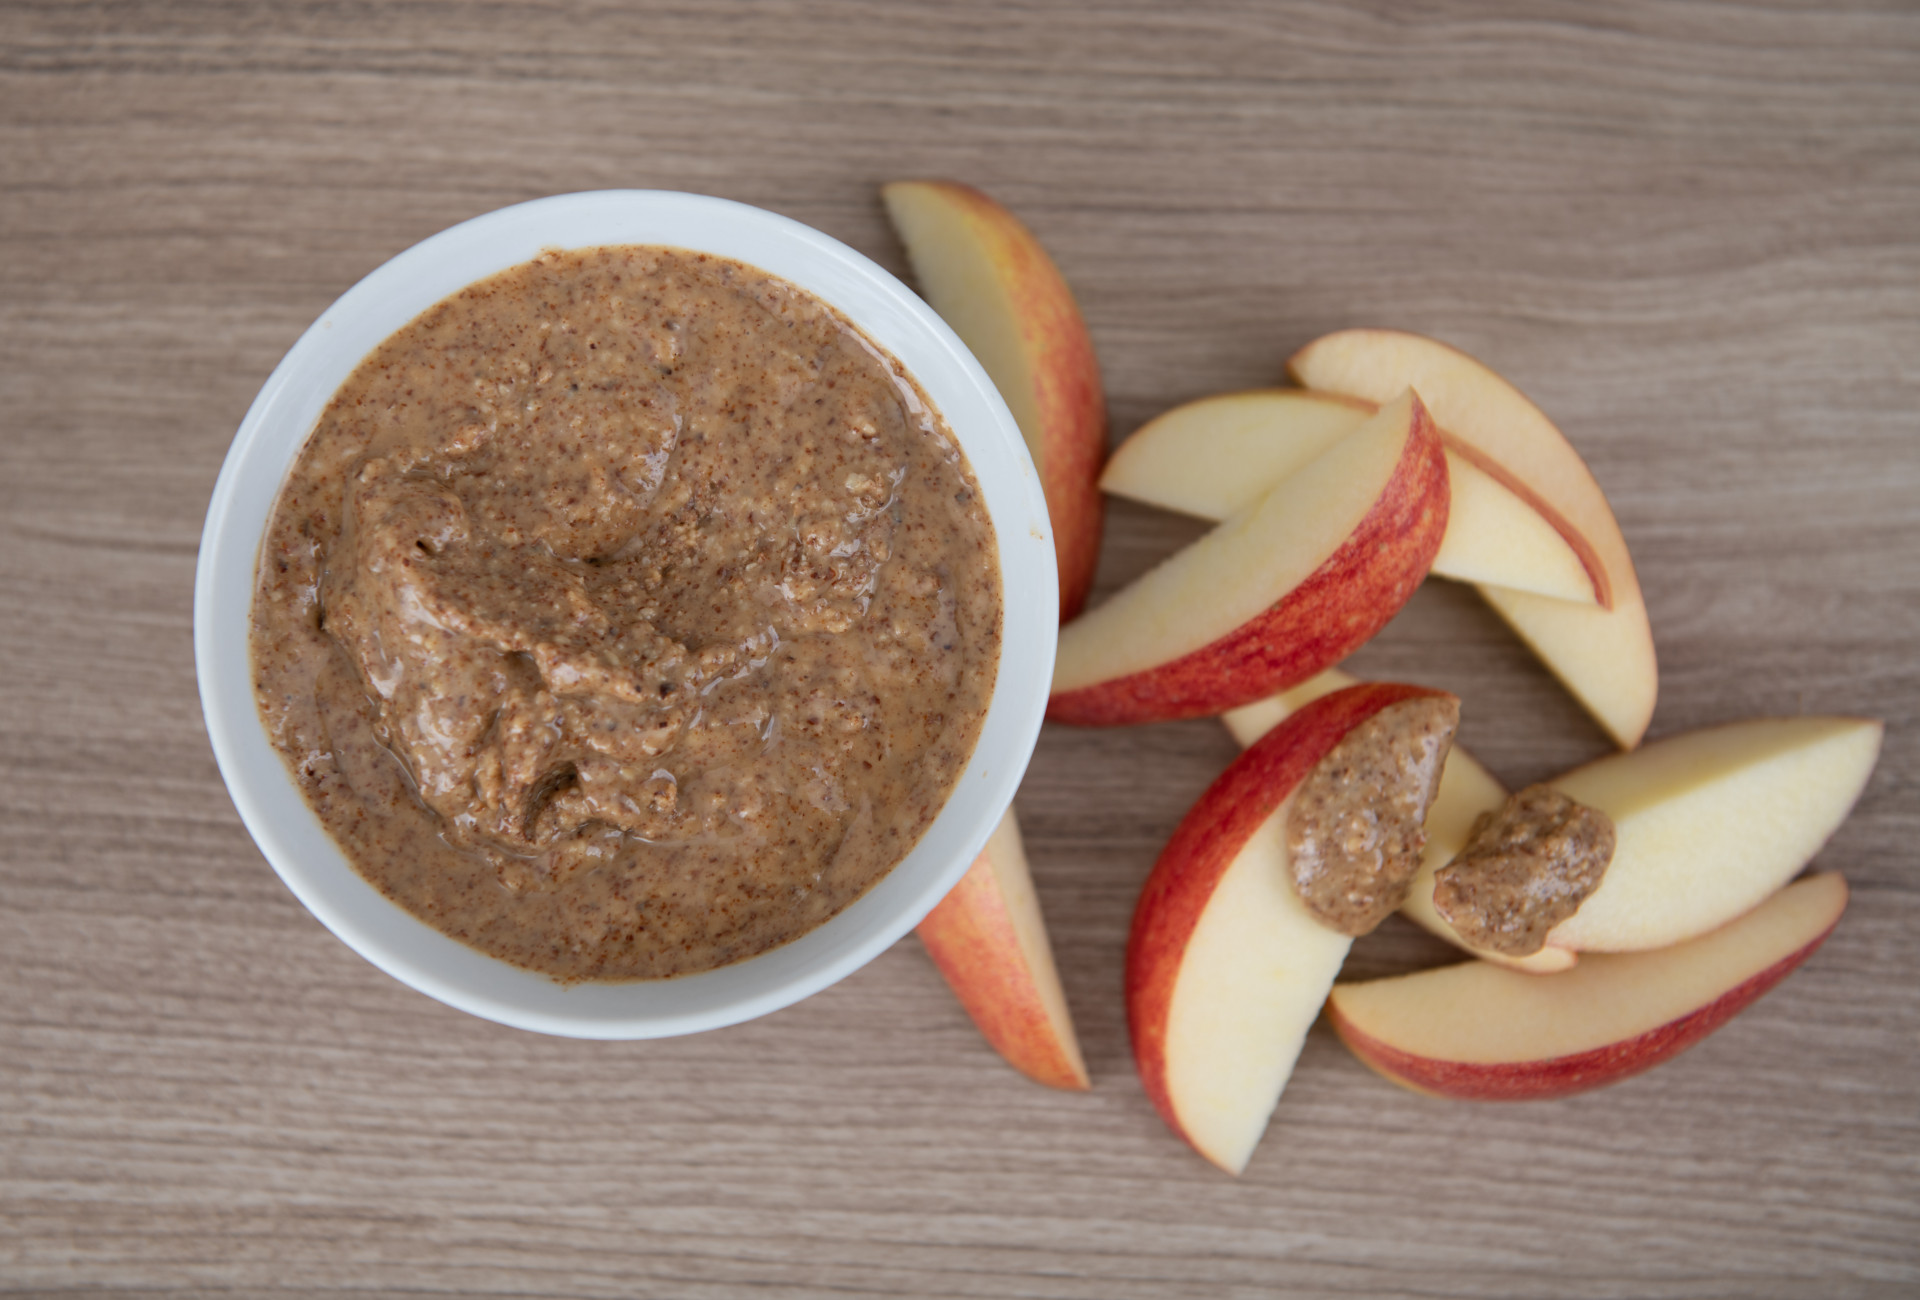 Upgrade the simple, durable fruit to a decadent treat with cinnamon and almond butter.<p><a href="https://www.msn.com/en-us/community/channel/vid-7xx8mnucu55yw63we9va2gwr7uihbxwc68fxqp25x6tg4ftibpra?cvid=94631541bc0f4f89bfd59158d696ad7e">Follow us and access great exclusive content every day</a></p>